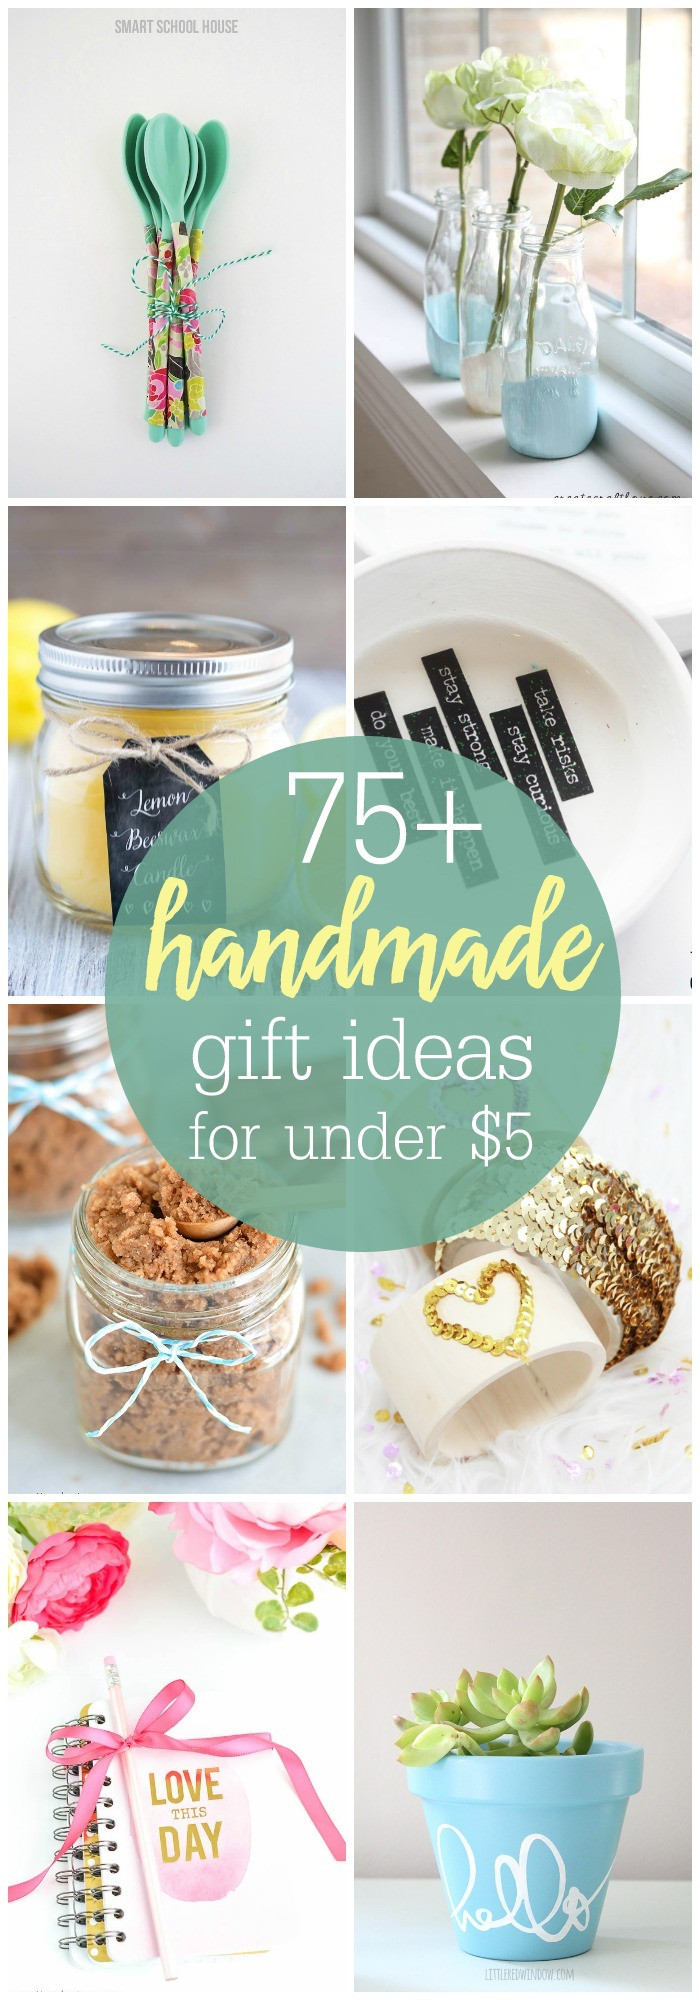 Christmas Gifts Ideas DIY
 DIY Gifts under $5